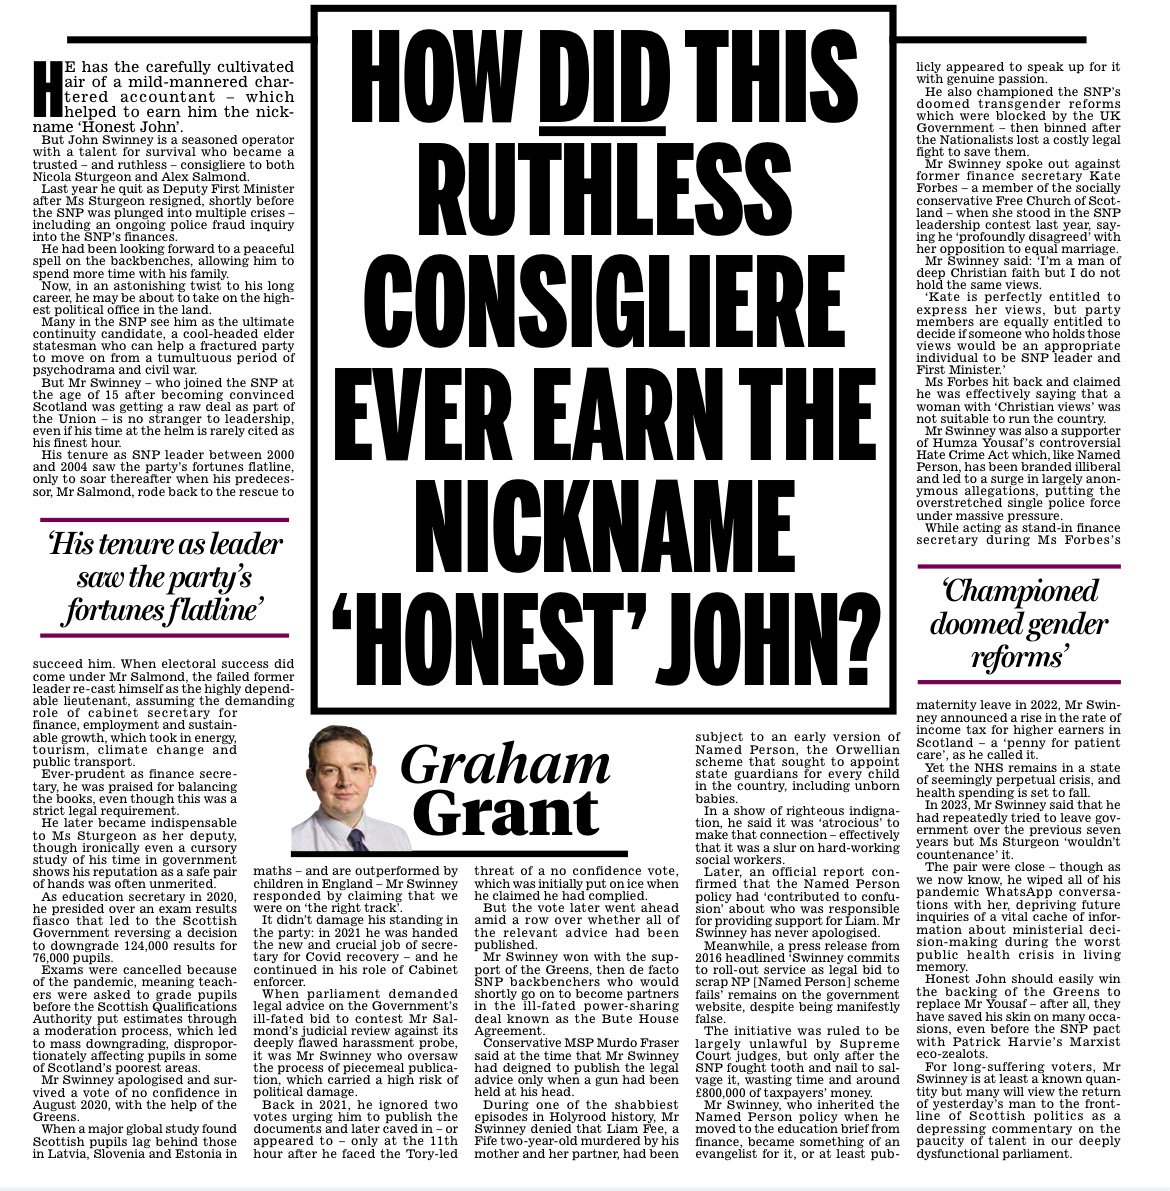 🔴John Swinney was a ruthless consigliere and Cabinet enforcer - and Sturgeon’s Minister for Cover-Ups. Read more about ‘Honest’ John, the yesterday’s man who promises more chaos and division 👉 dailymail.co.uk/news/article-1…